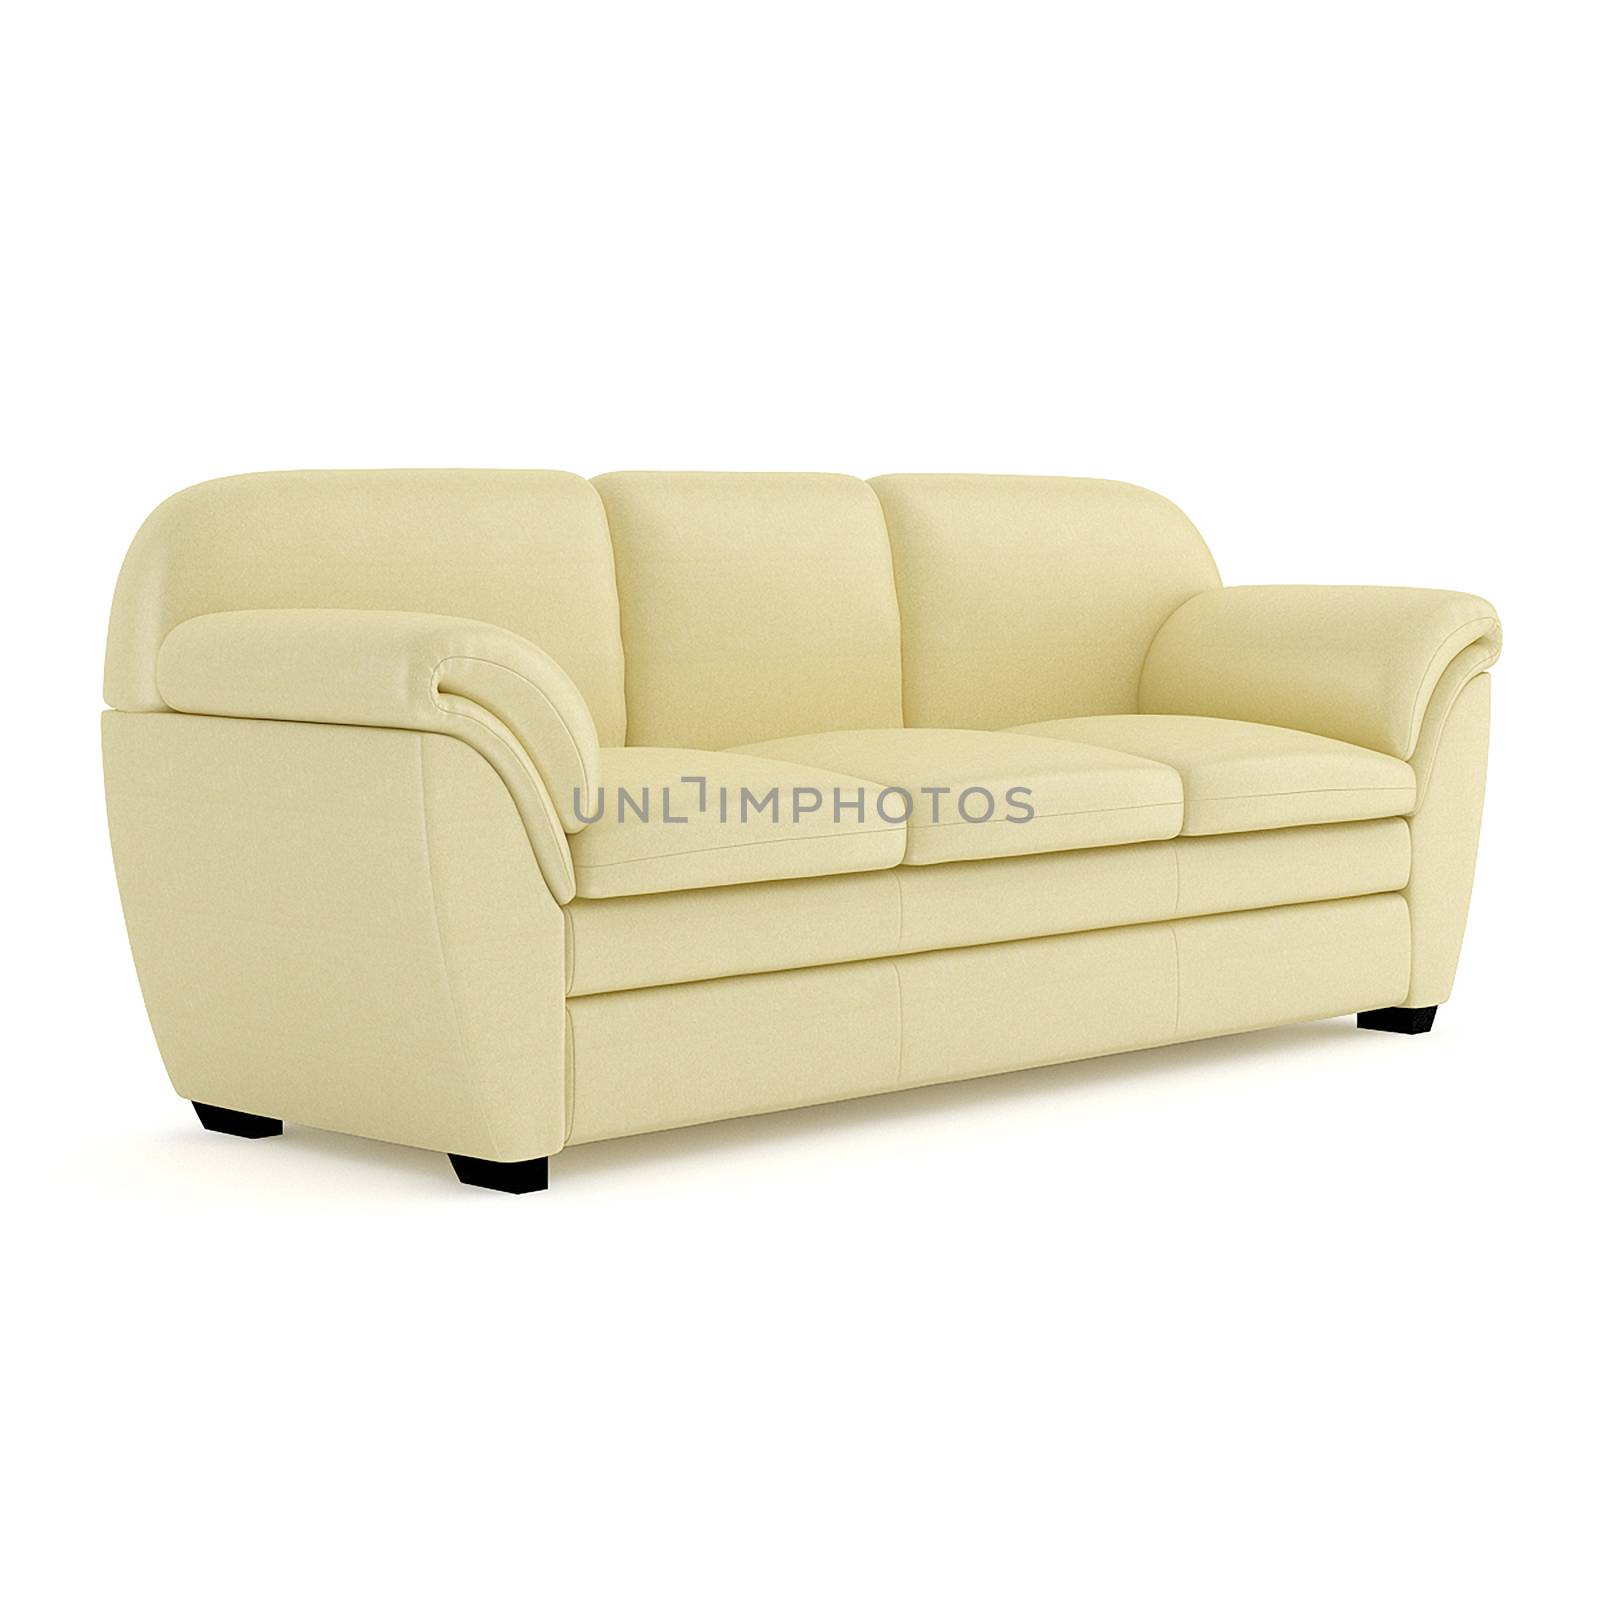 Comfortable sofa with cushions, covered with light yellow material. 3D rendering.